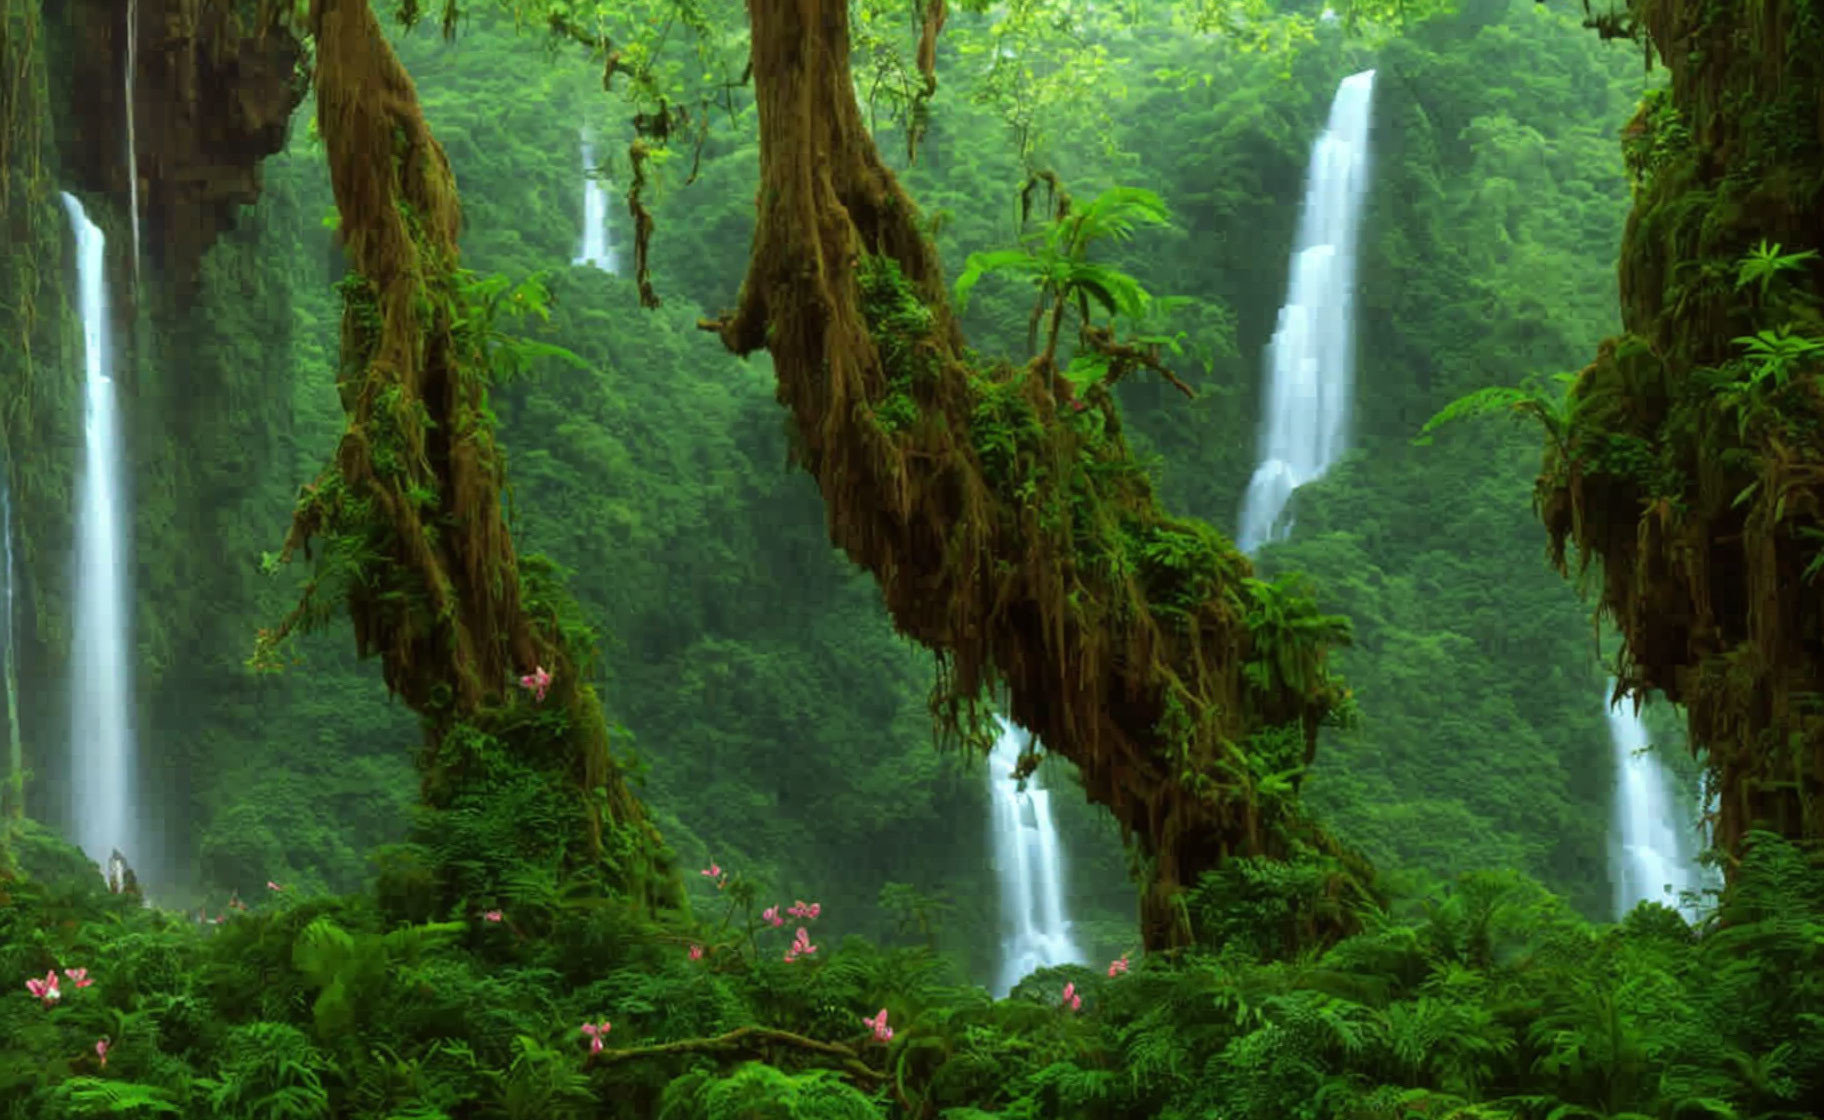 Tranquil jungle waterfall with lush greenery and pink flowers